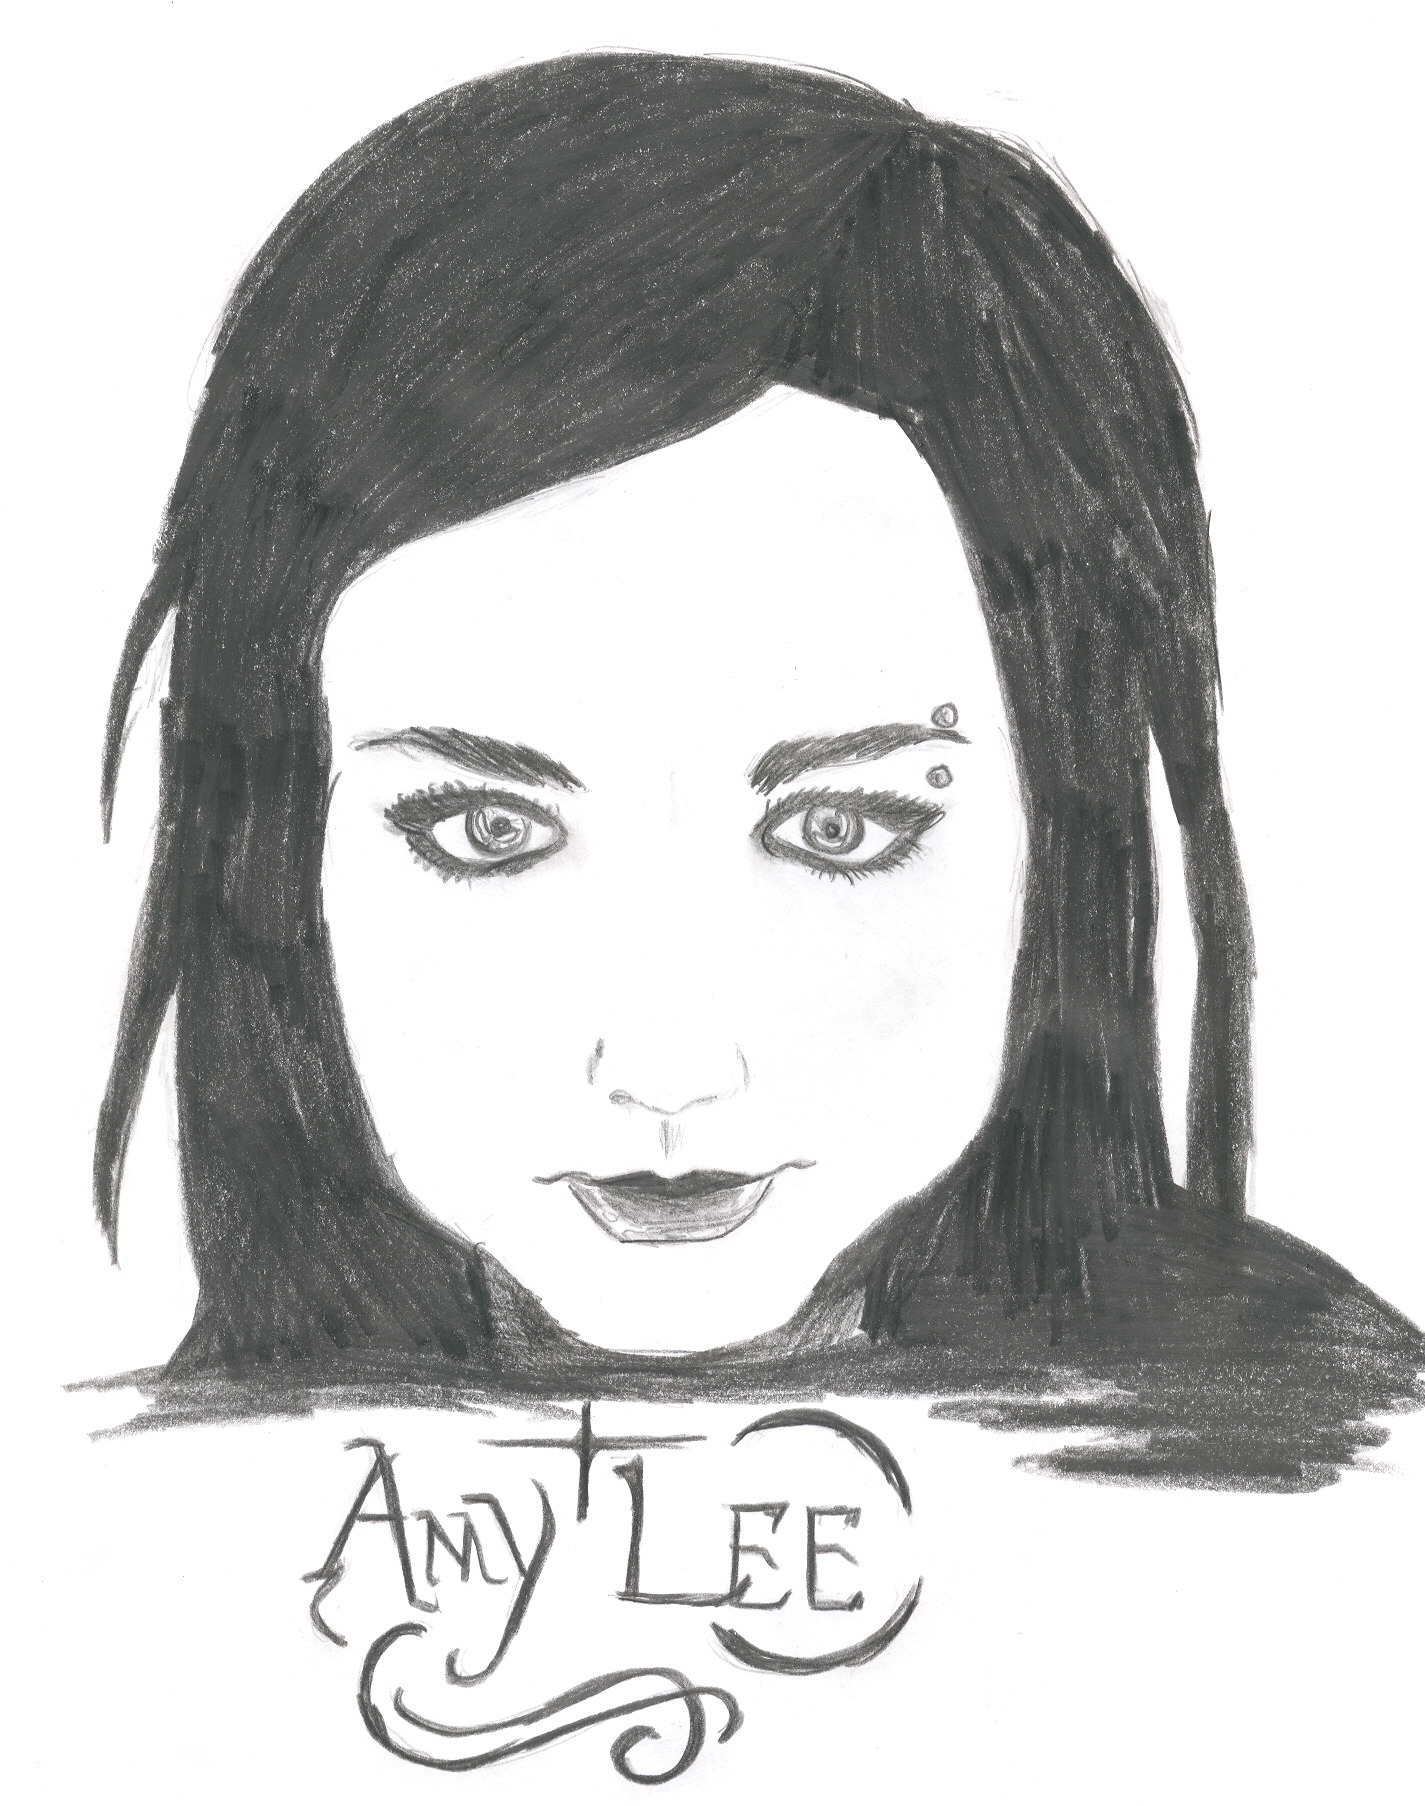 Amy Lee by insanemusiclover